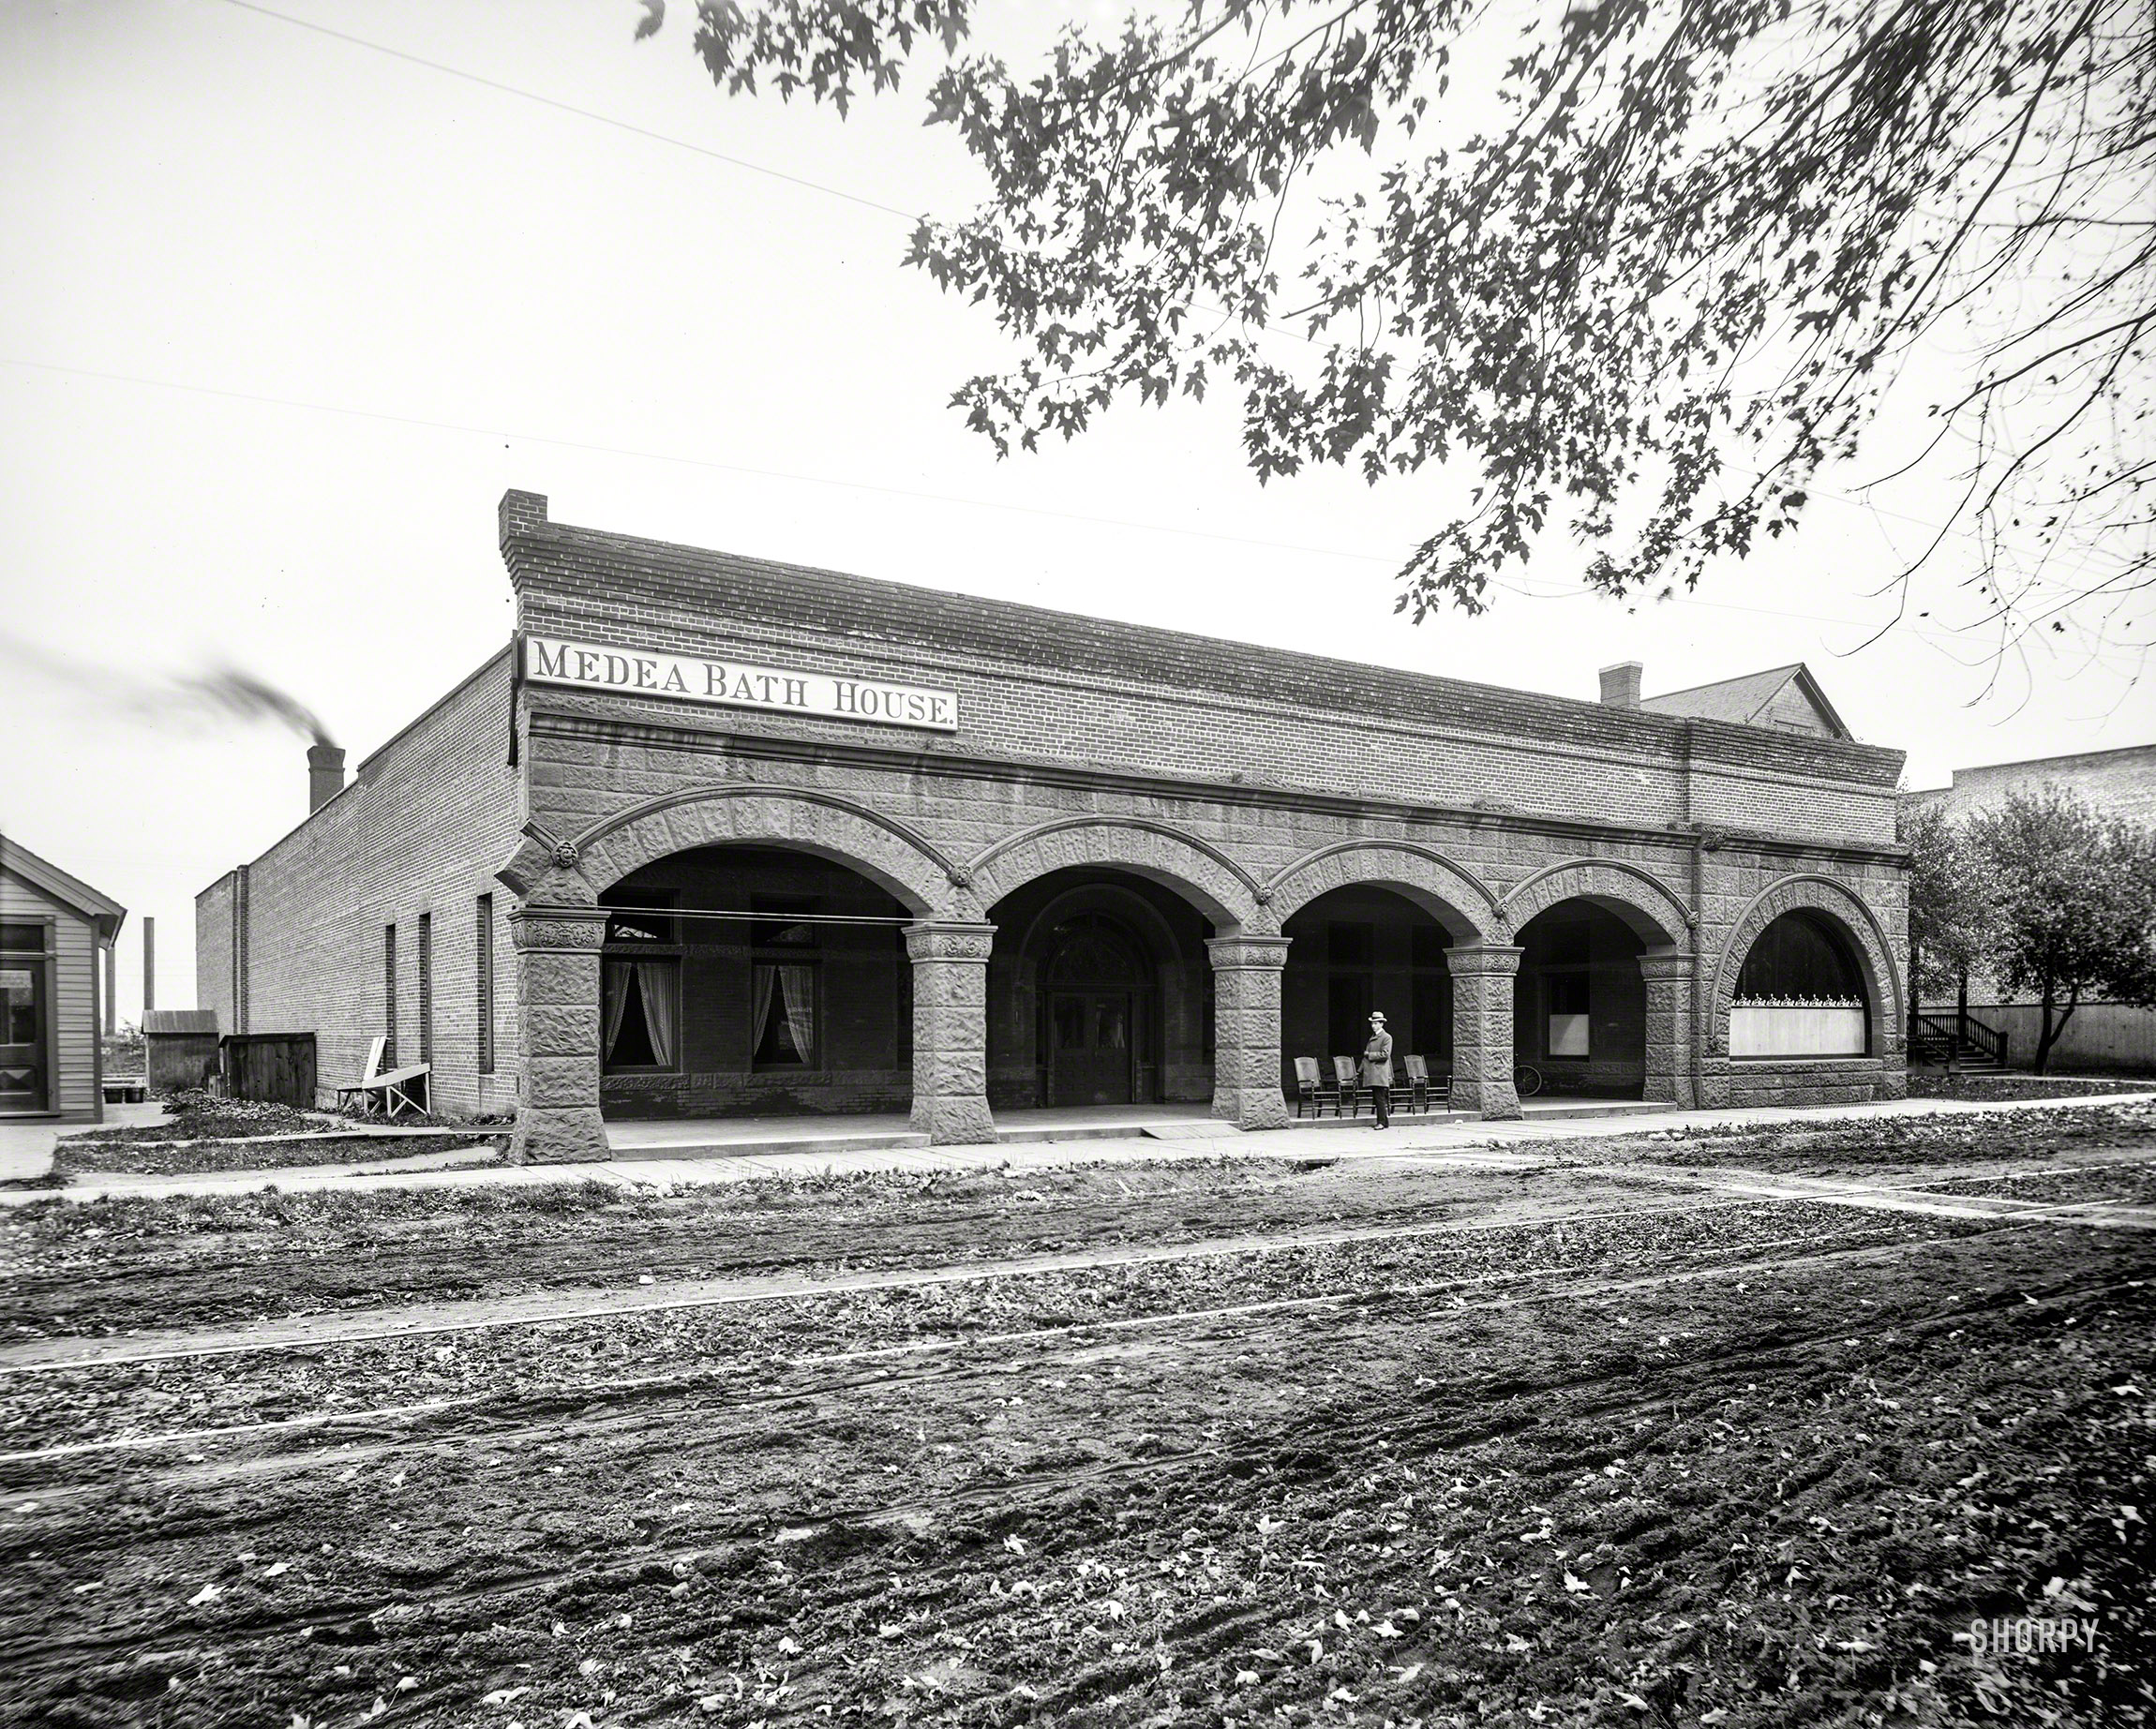 Mount Clemens, Michigan, circa 1899. "Medea Bath House." 8x10 inch dry plate glass negative, Detroit Photographic Company. View full size.